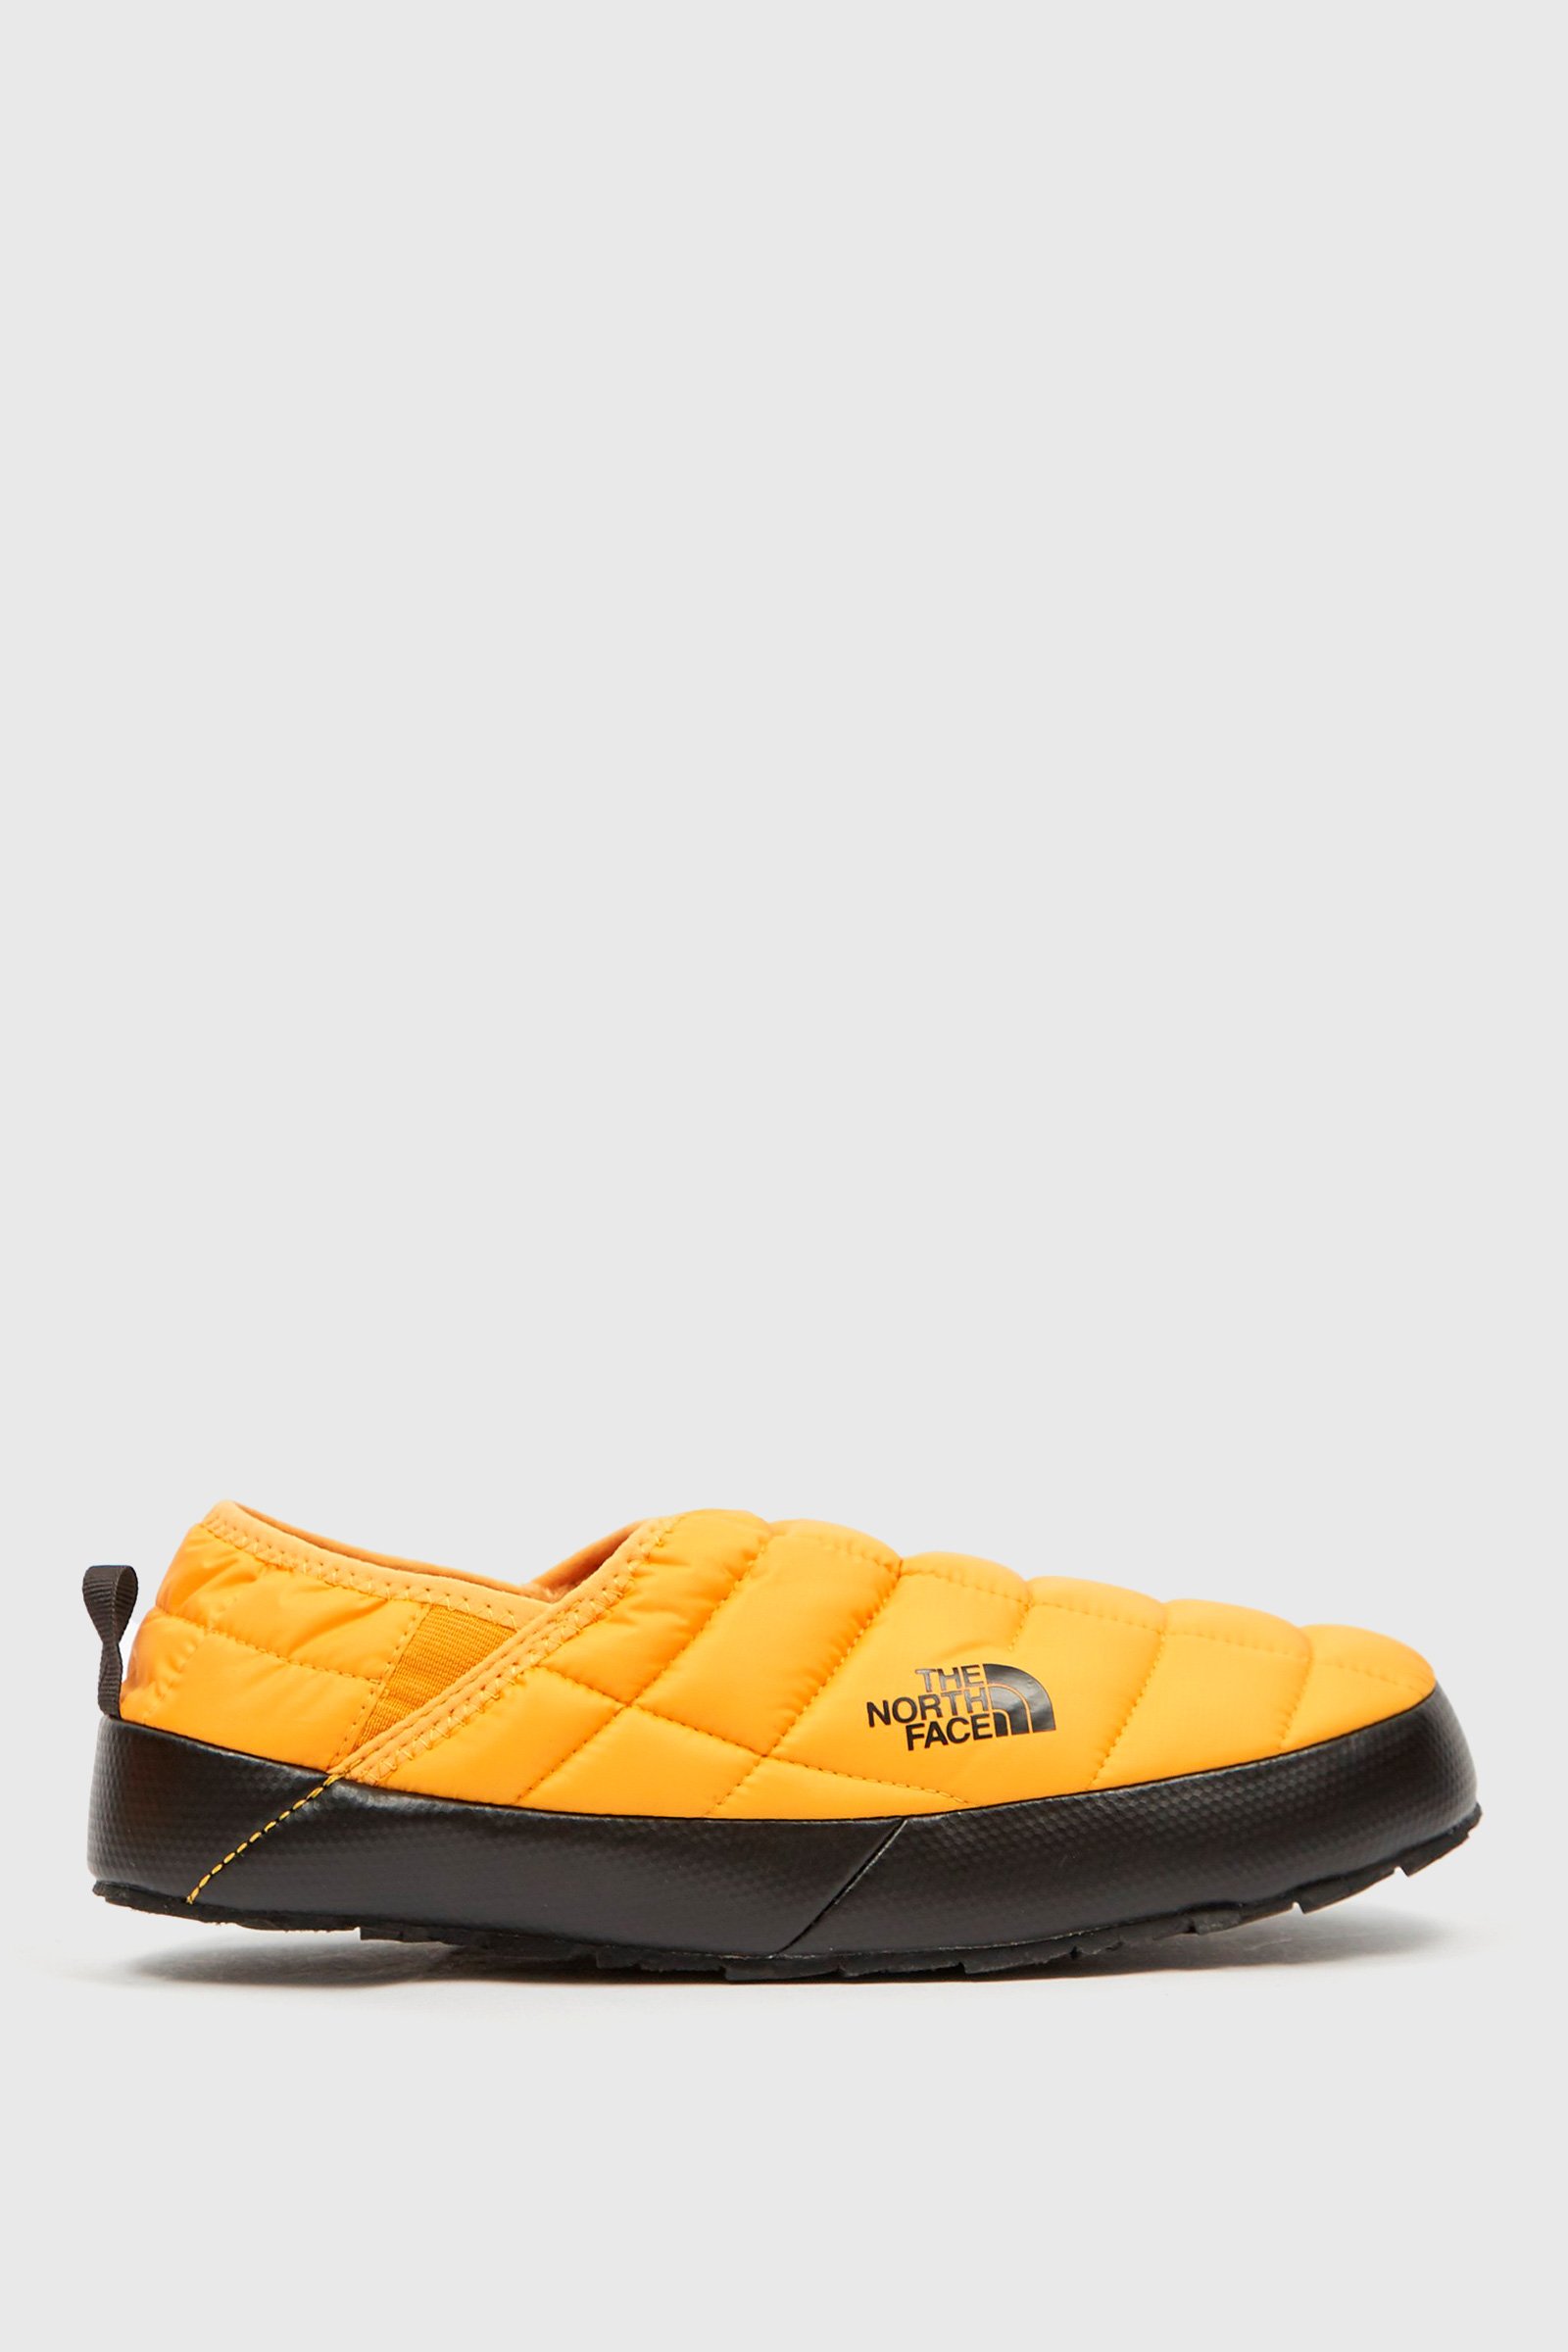 The North Face Men's Thermoball Traction Mule V Online Shop, UP TO 